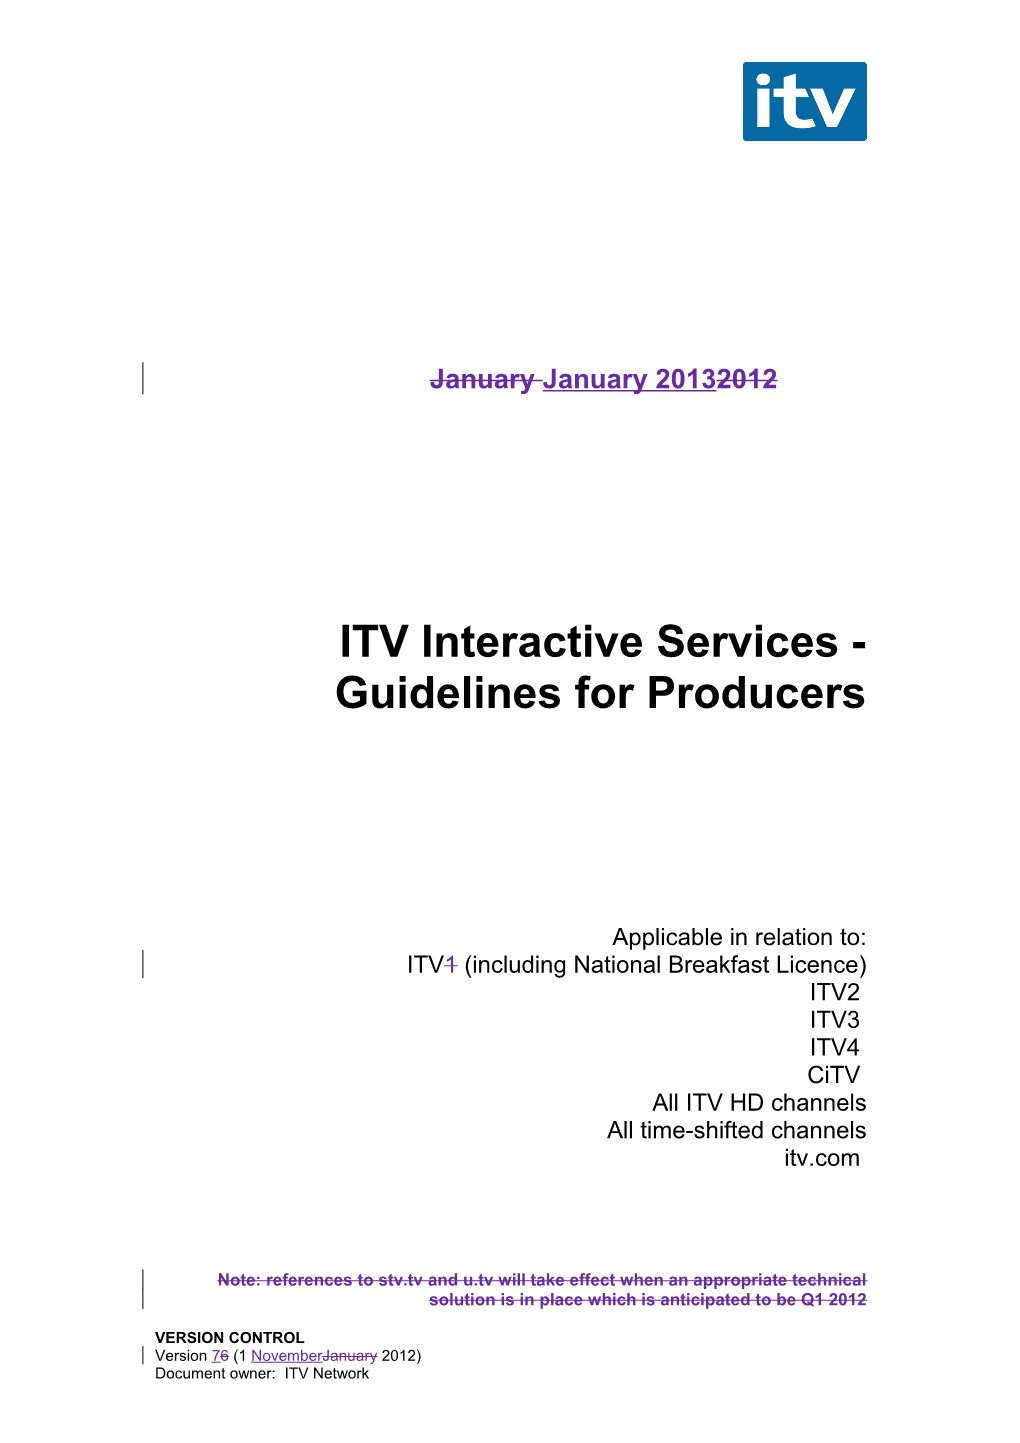 ITV Interactive Services - Guidelines for Producers